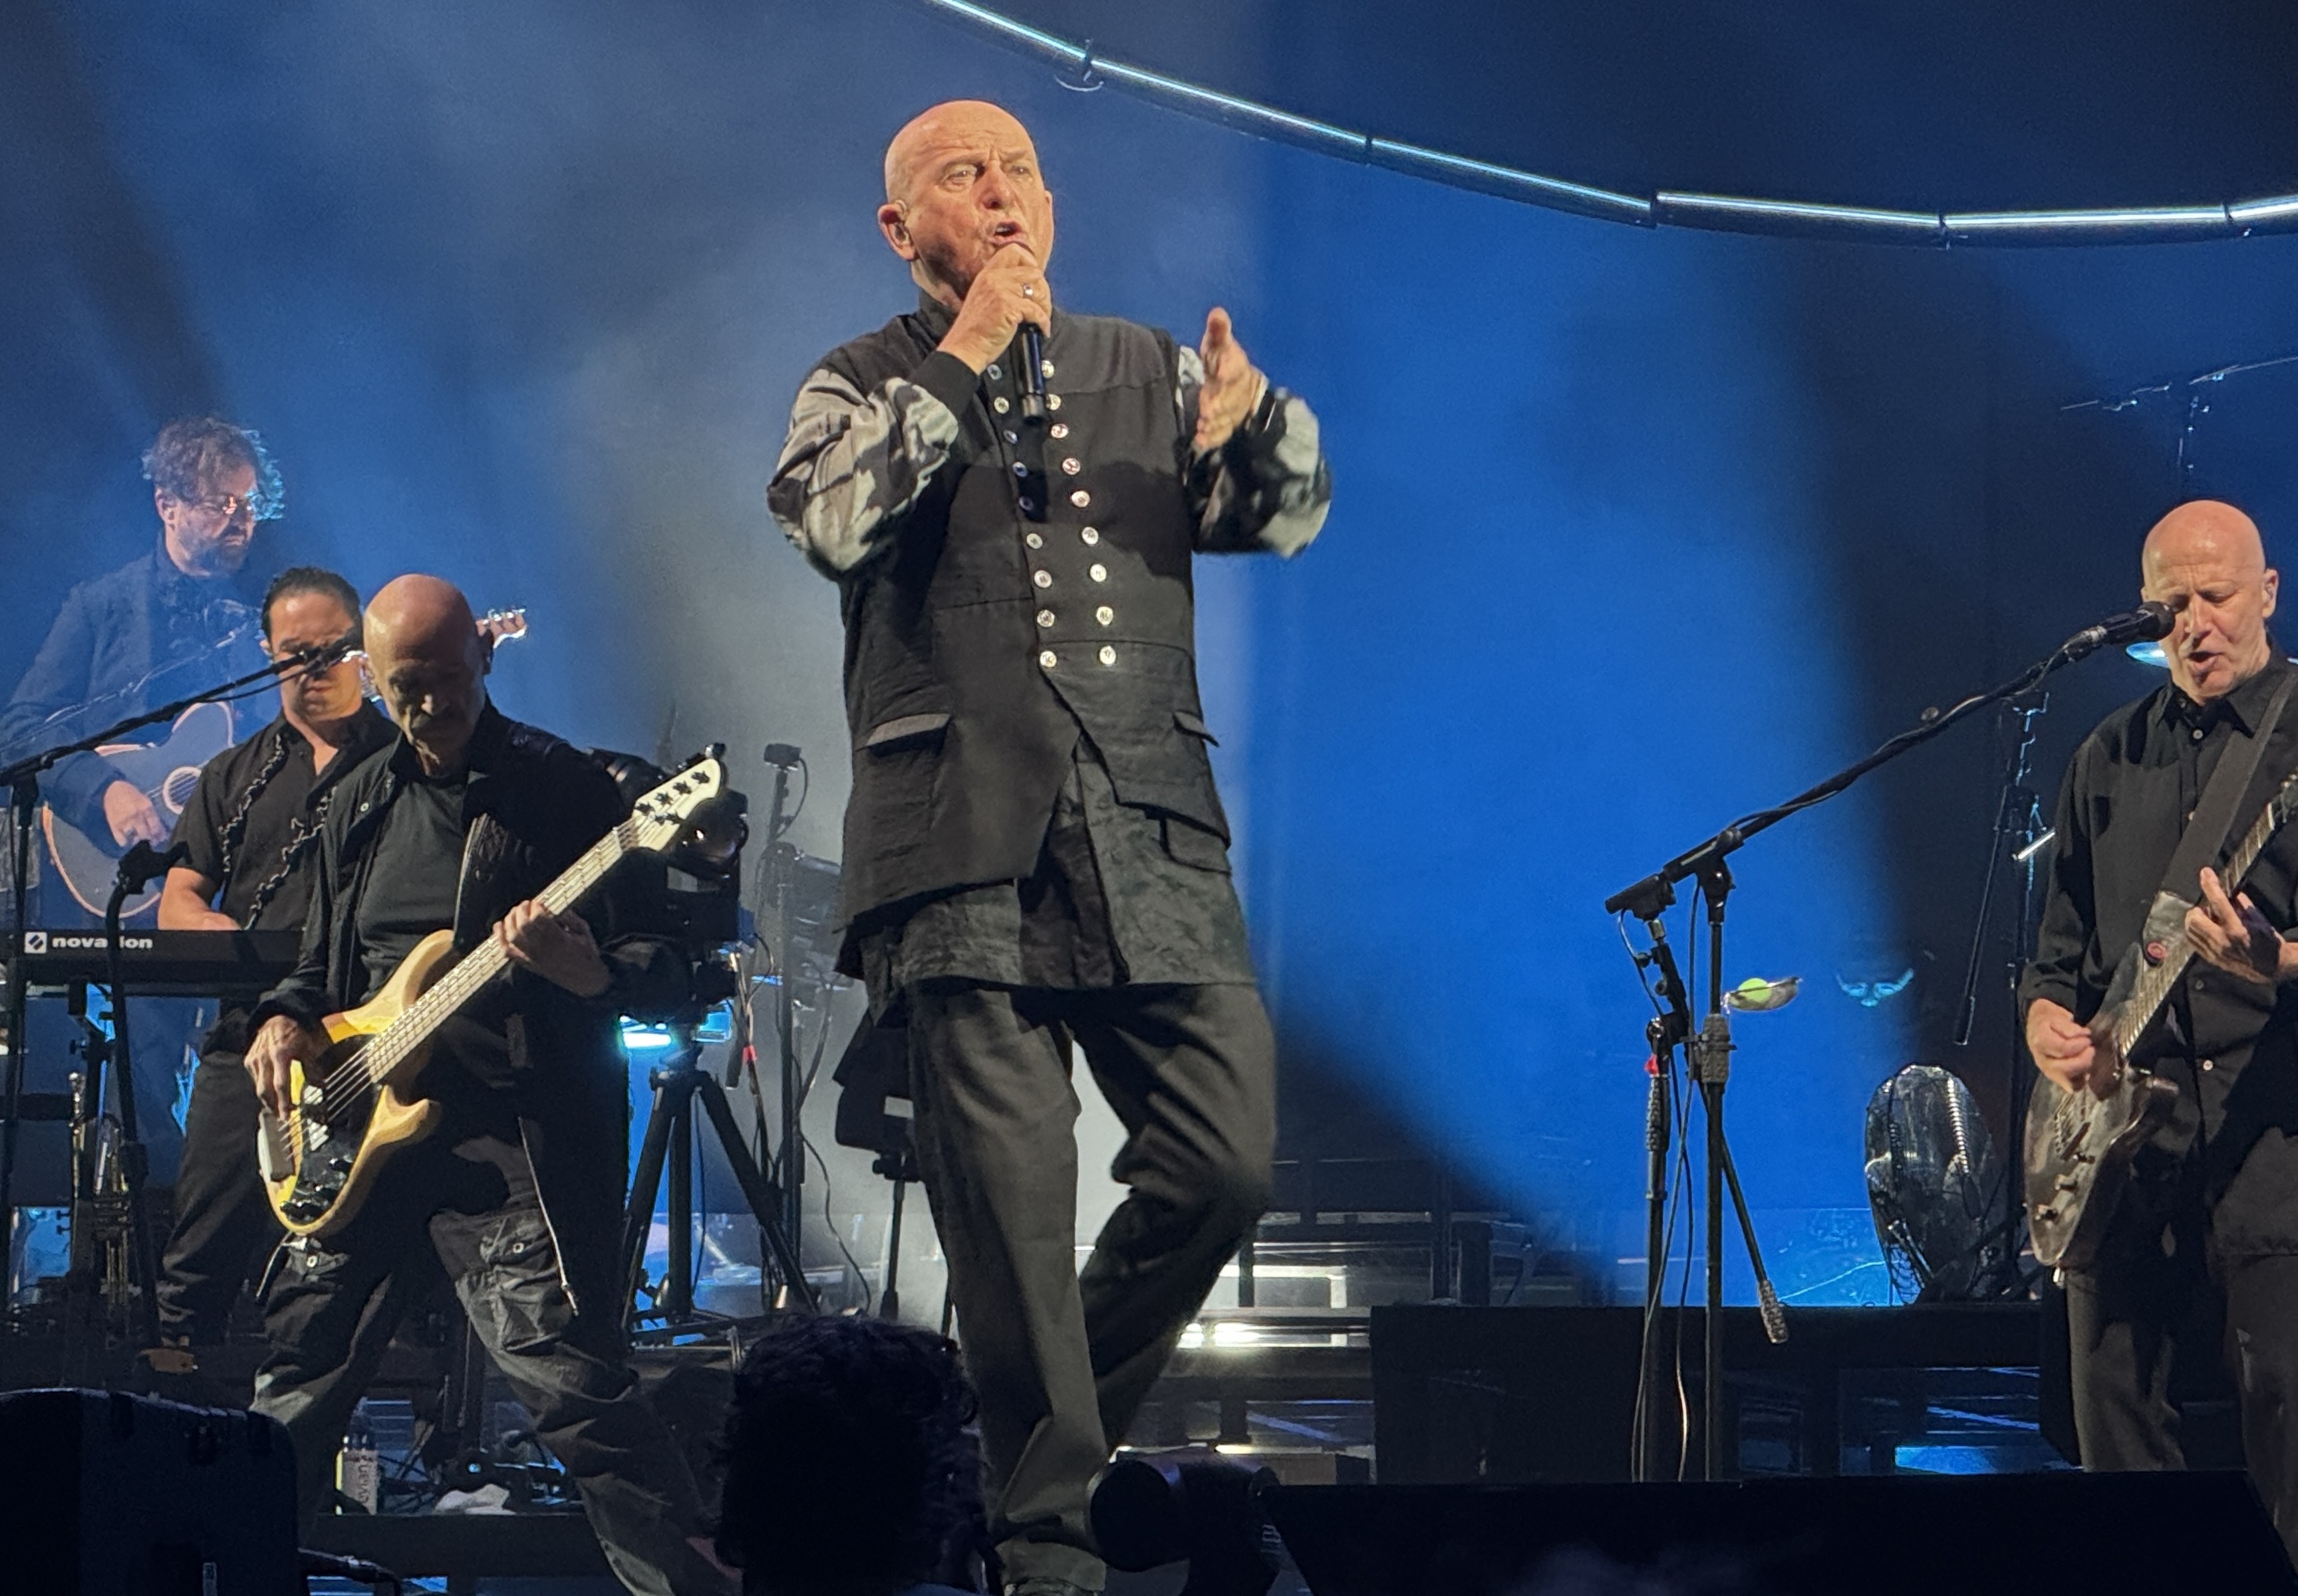 Peter Gabriel on stage singing with Tony Levin playing bass to his right and David Rhodes playing guitar to his left